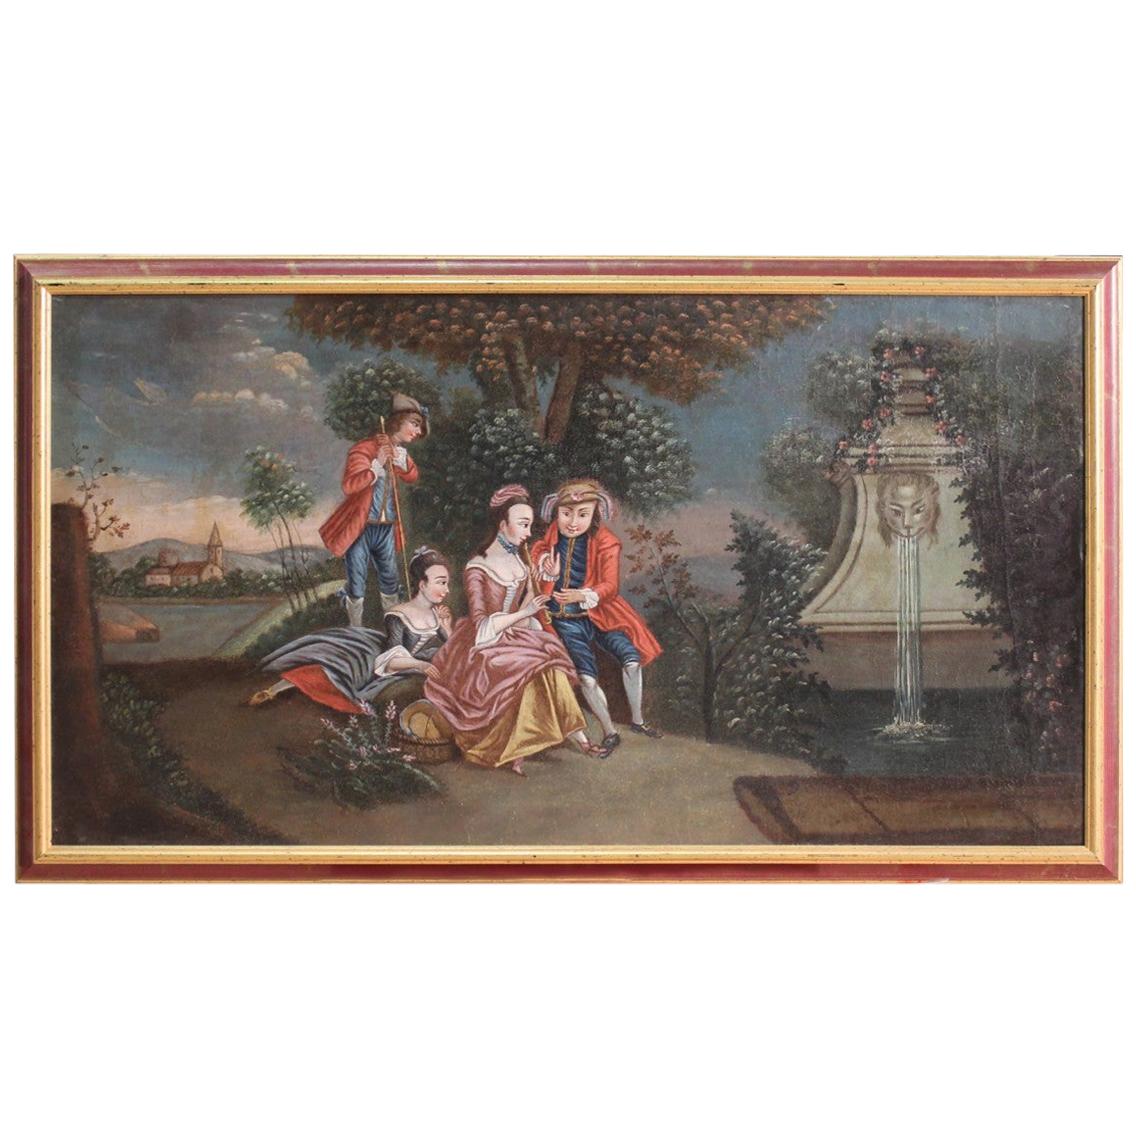 Antique Venetian Romantic Landscape Painting from the 19th Century For Sale